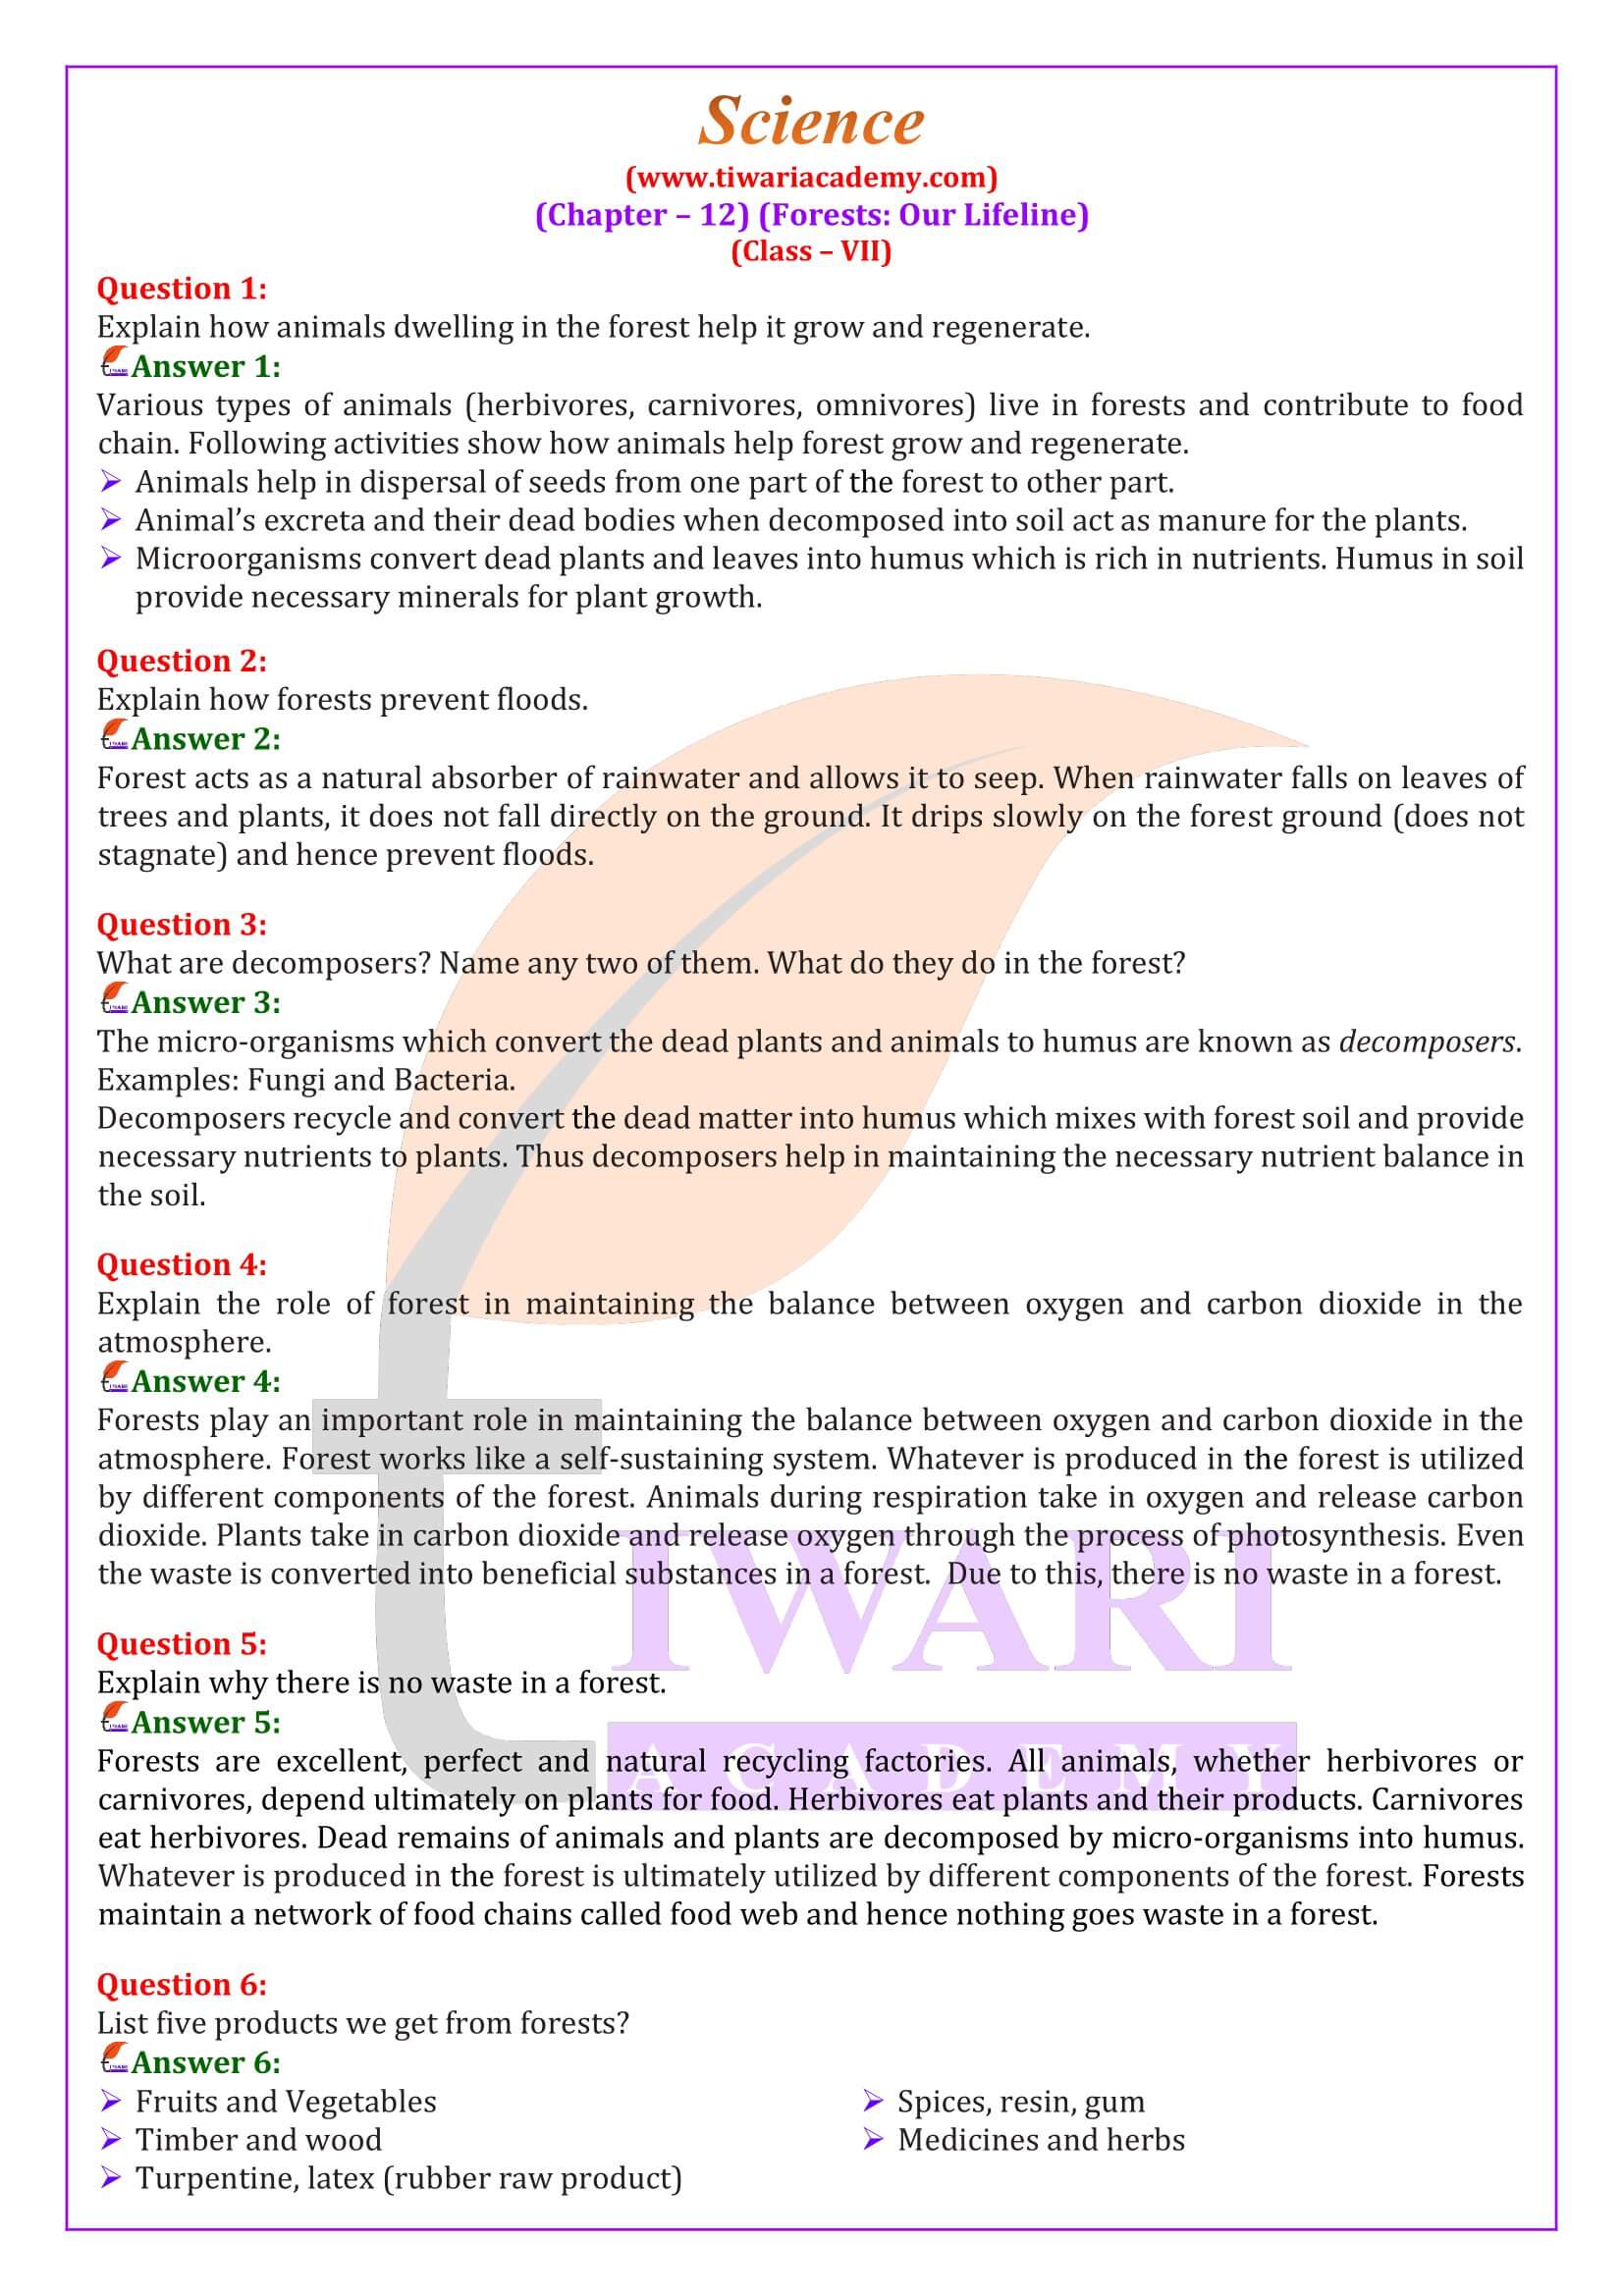 NCERT Solutions for Class 7 Science Chapter 12 in English Medium